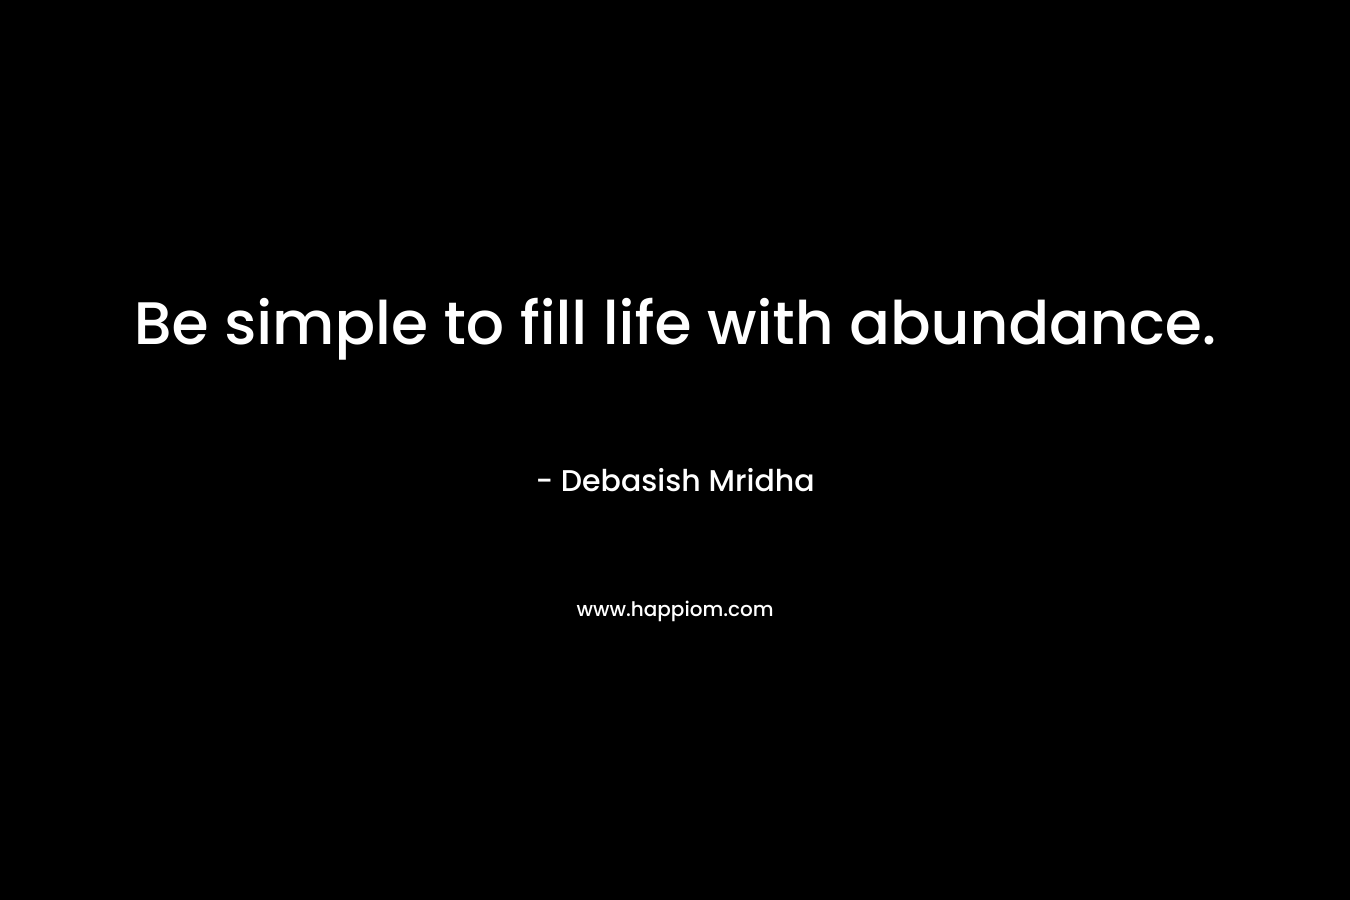 Be simple to fill life with abundance.